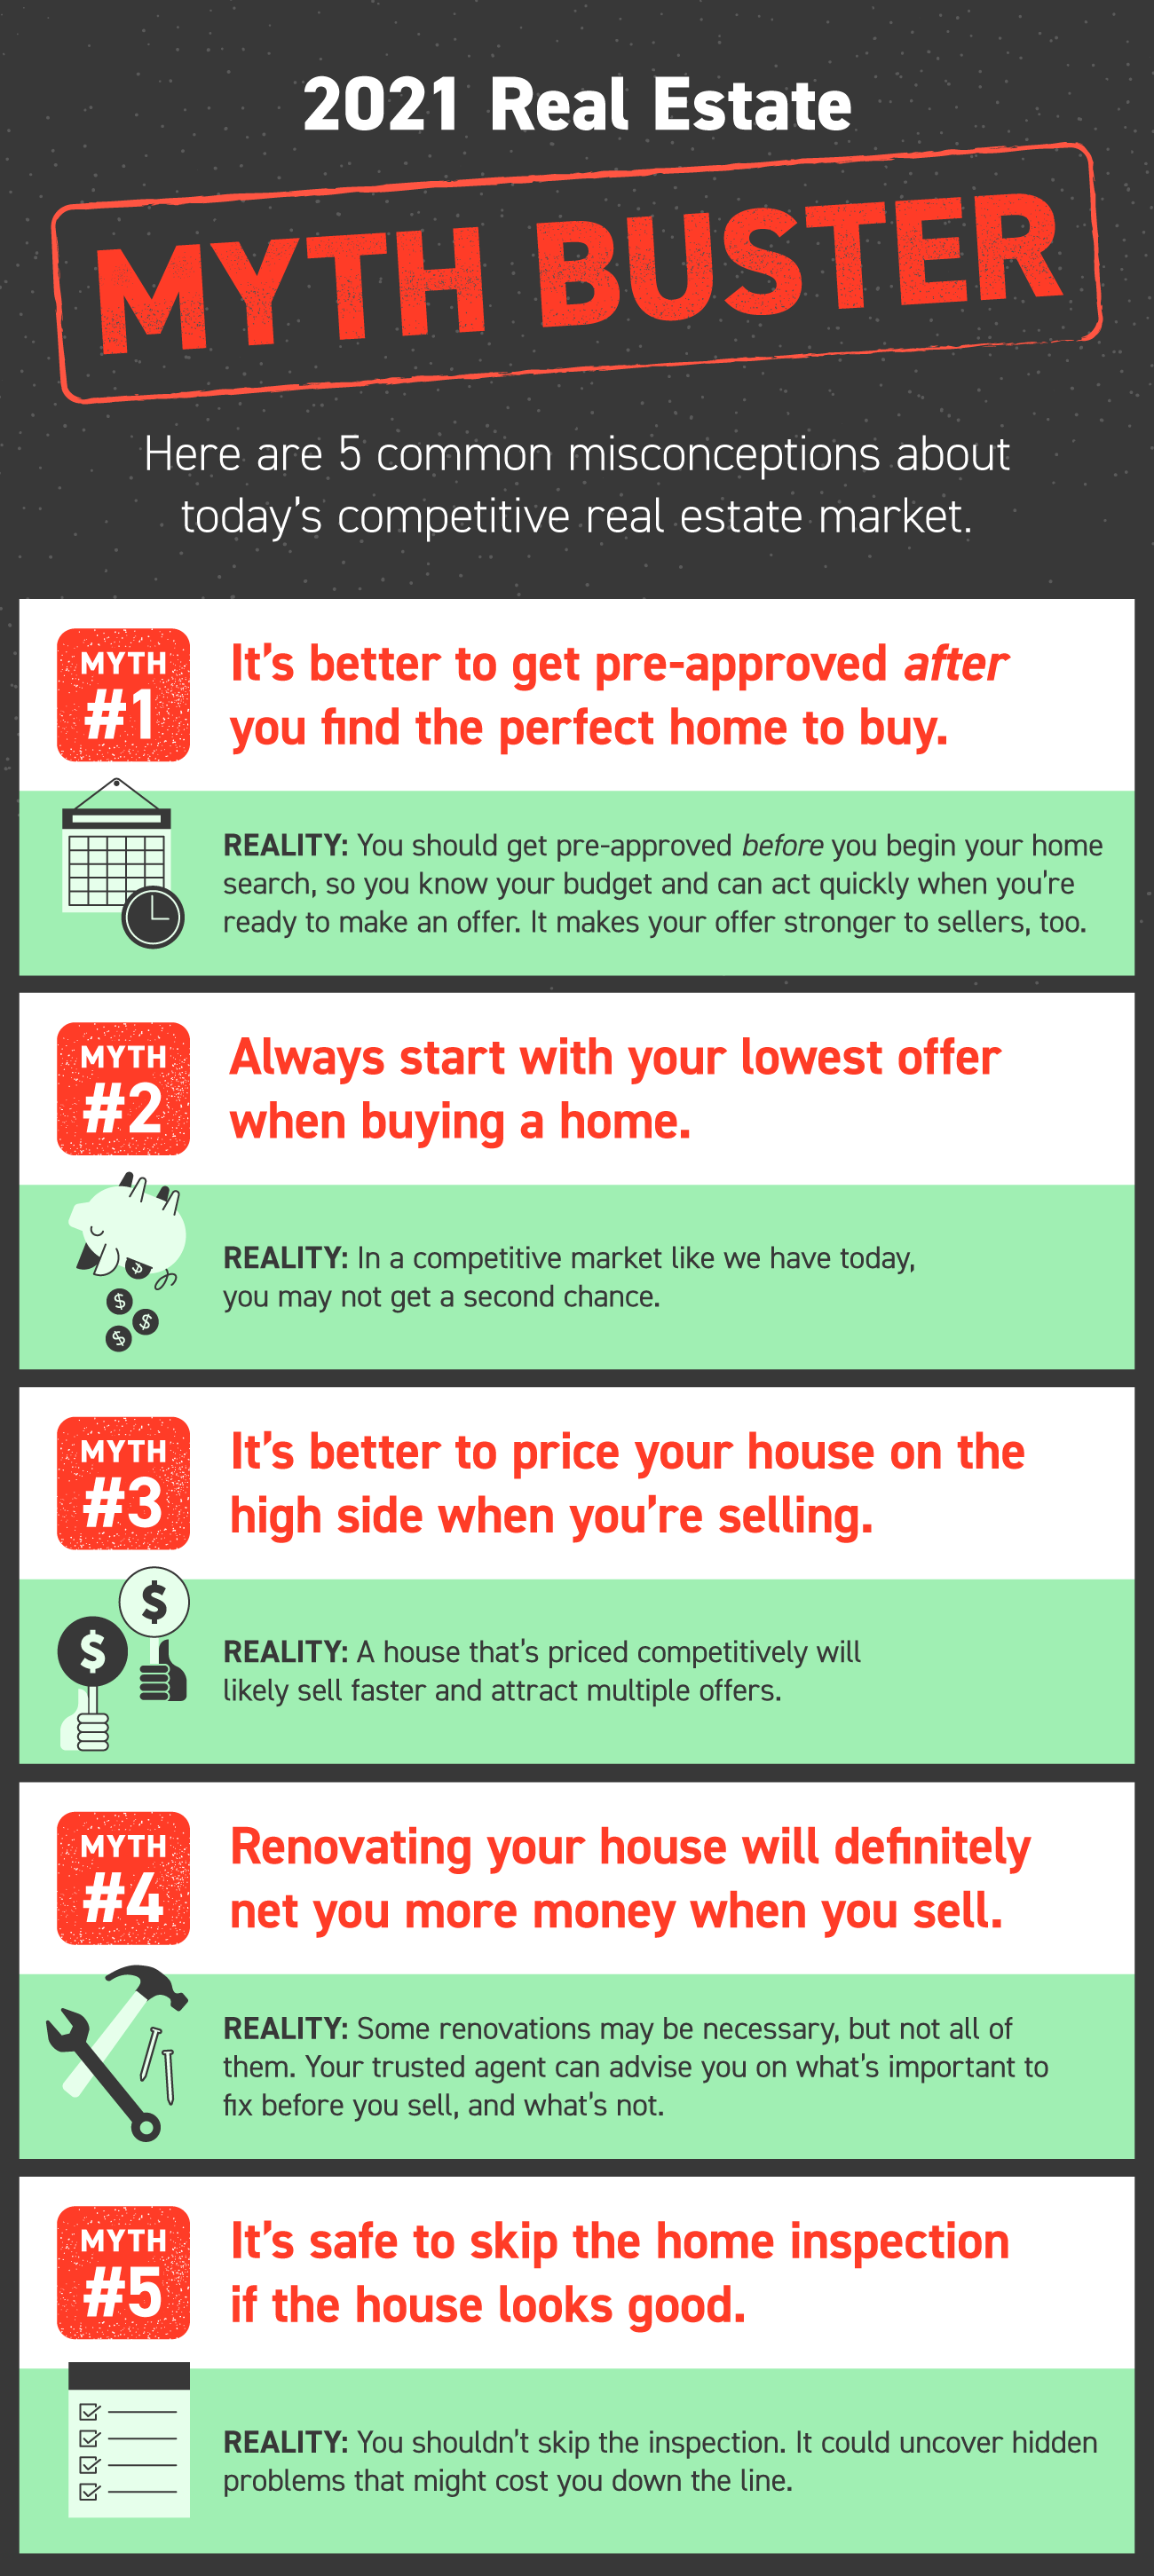 The Top 5 Real Estate Myths Busted